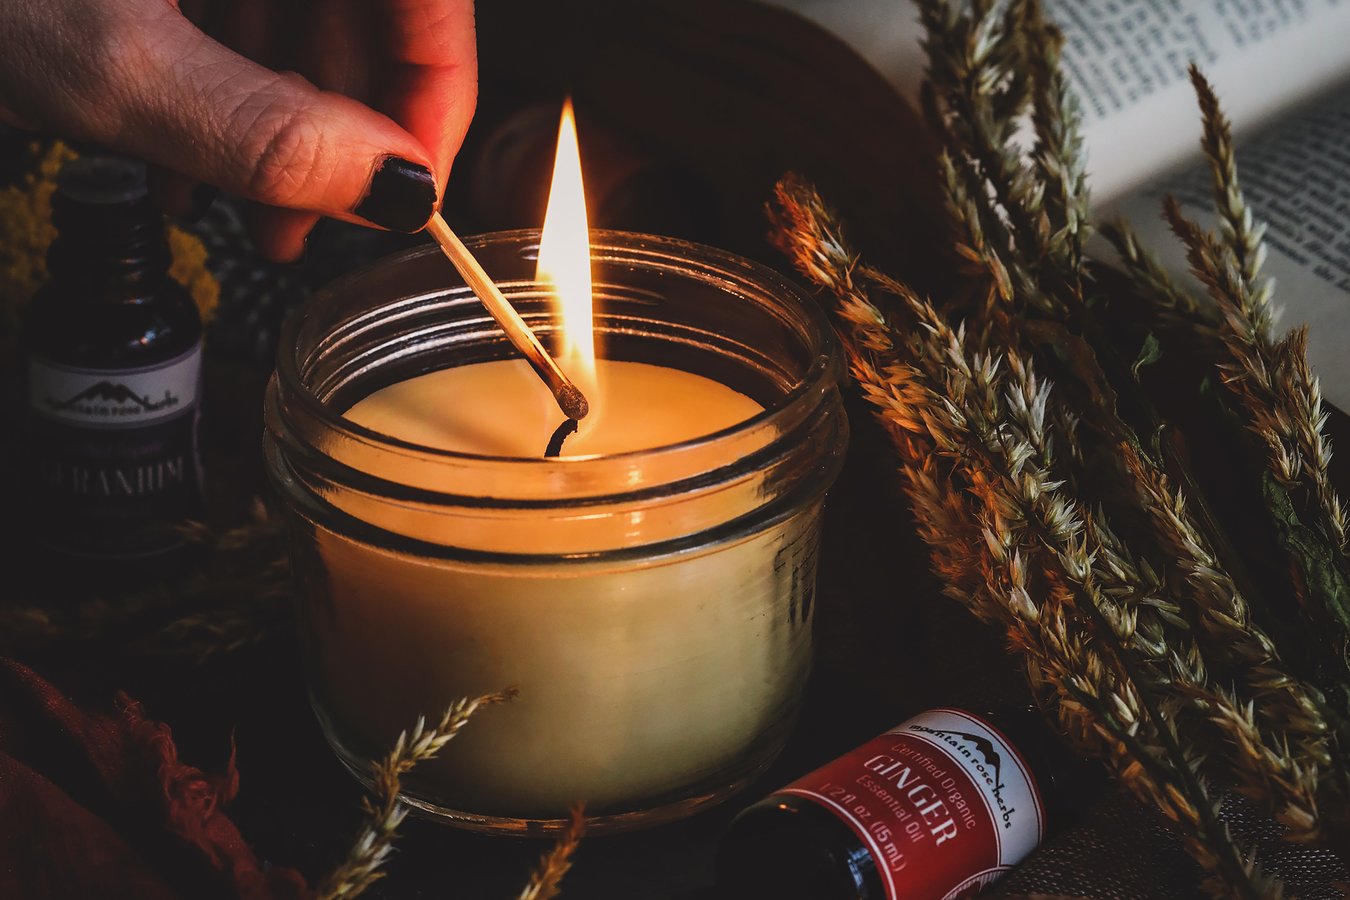 A person lighting a homemade candle in a jar surrounded by botanicals and bottles of essential oils.